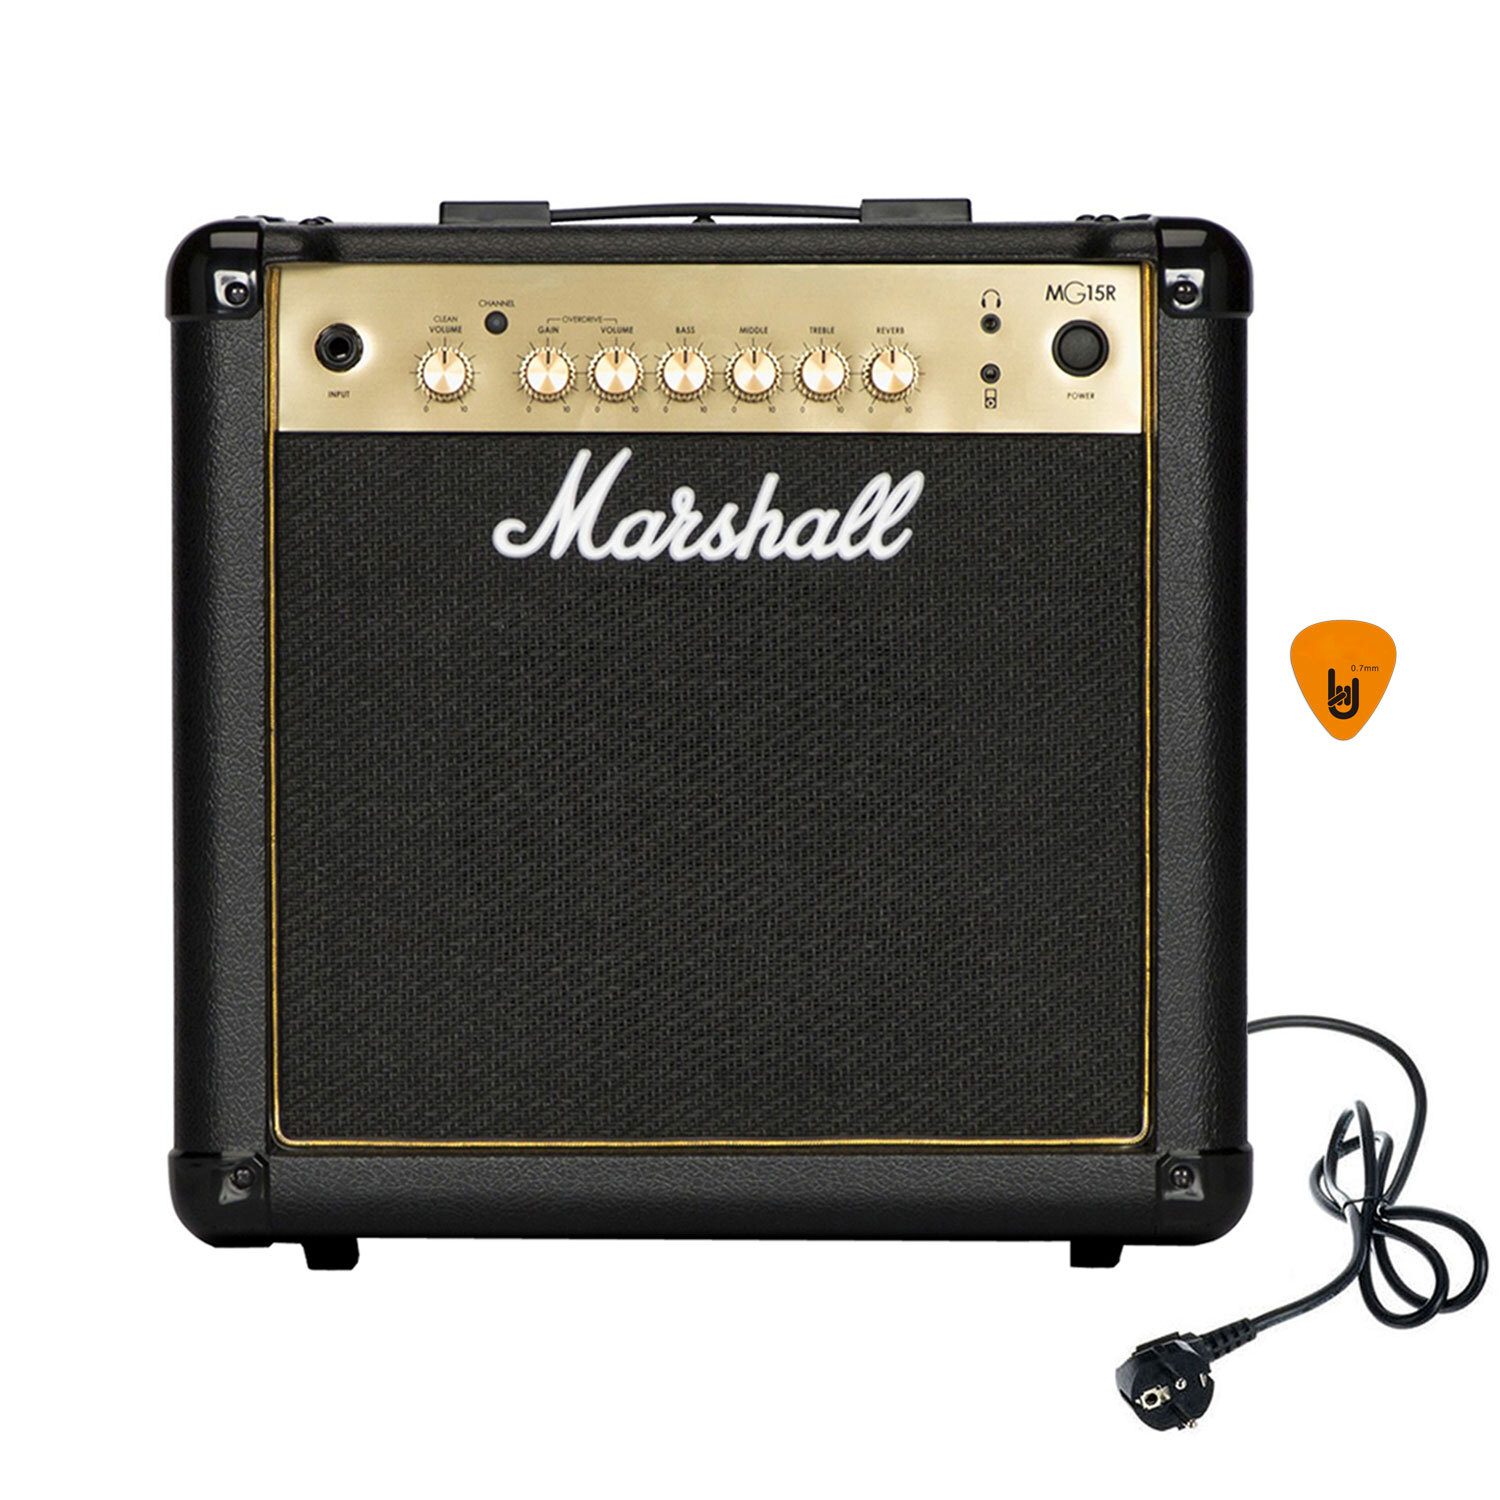 Amply - Amplifier Marshall MG15R